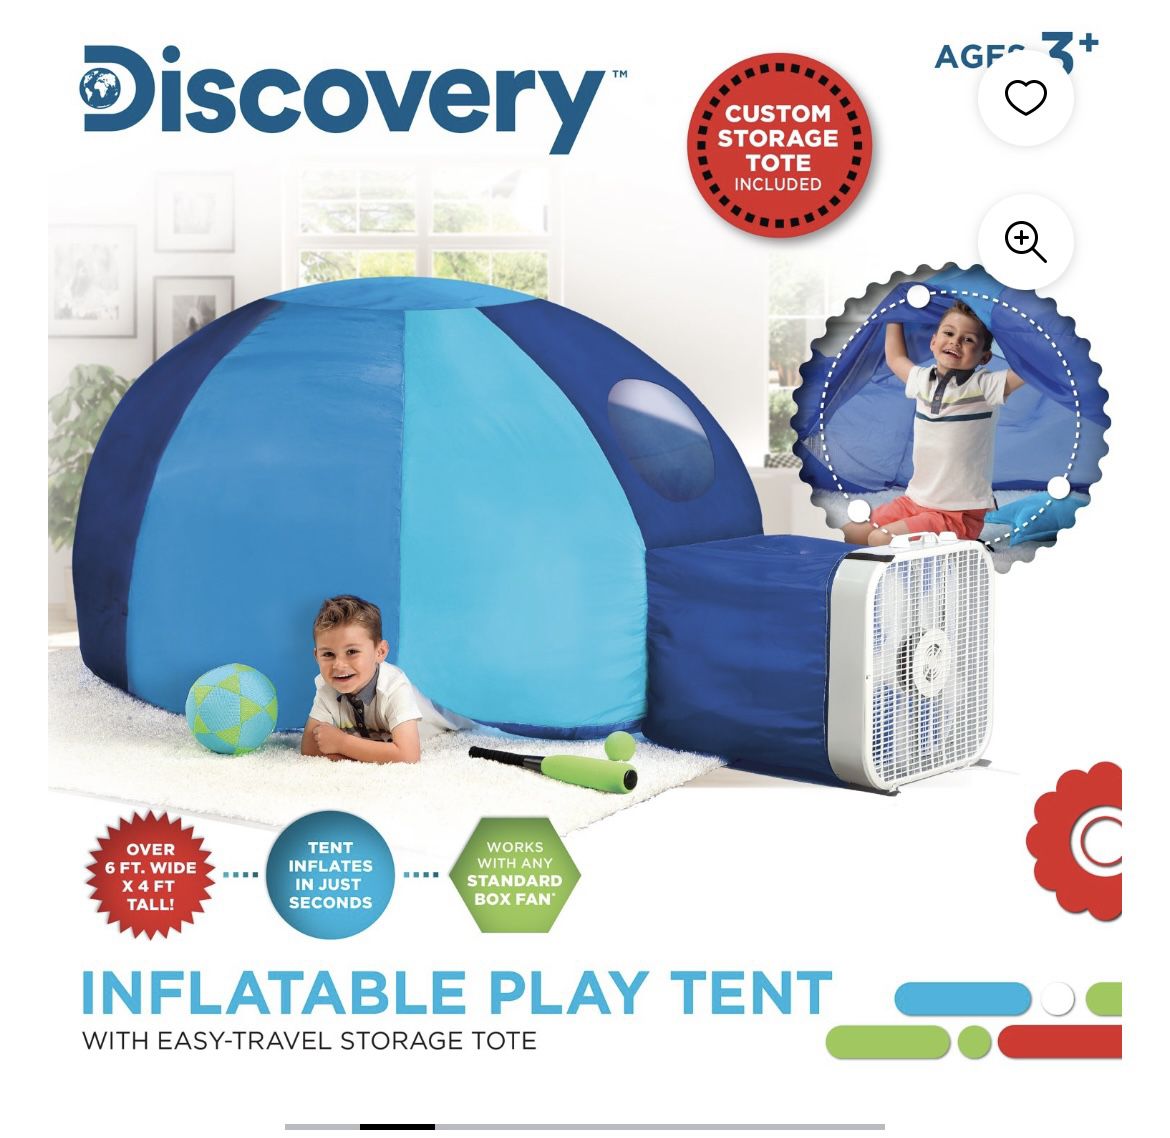 Inflatable X Tents, Dome Tents